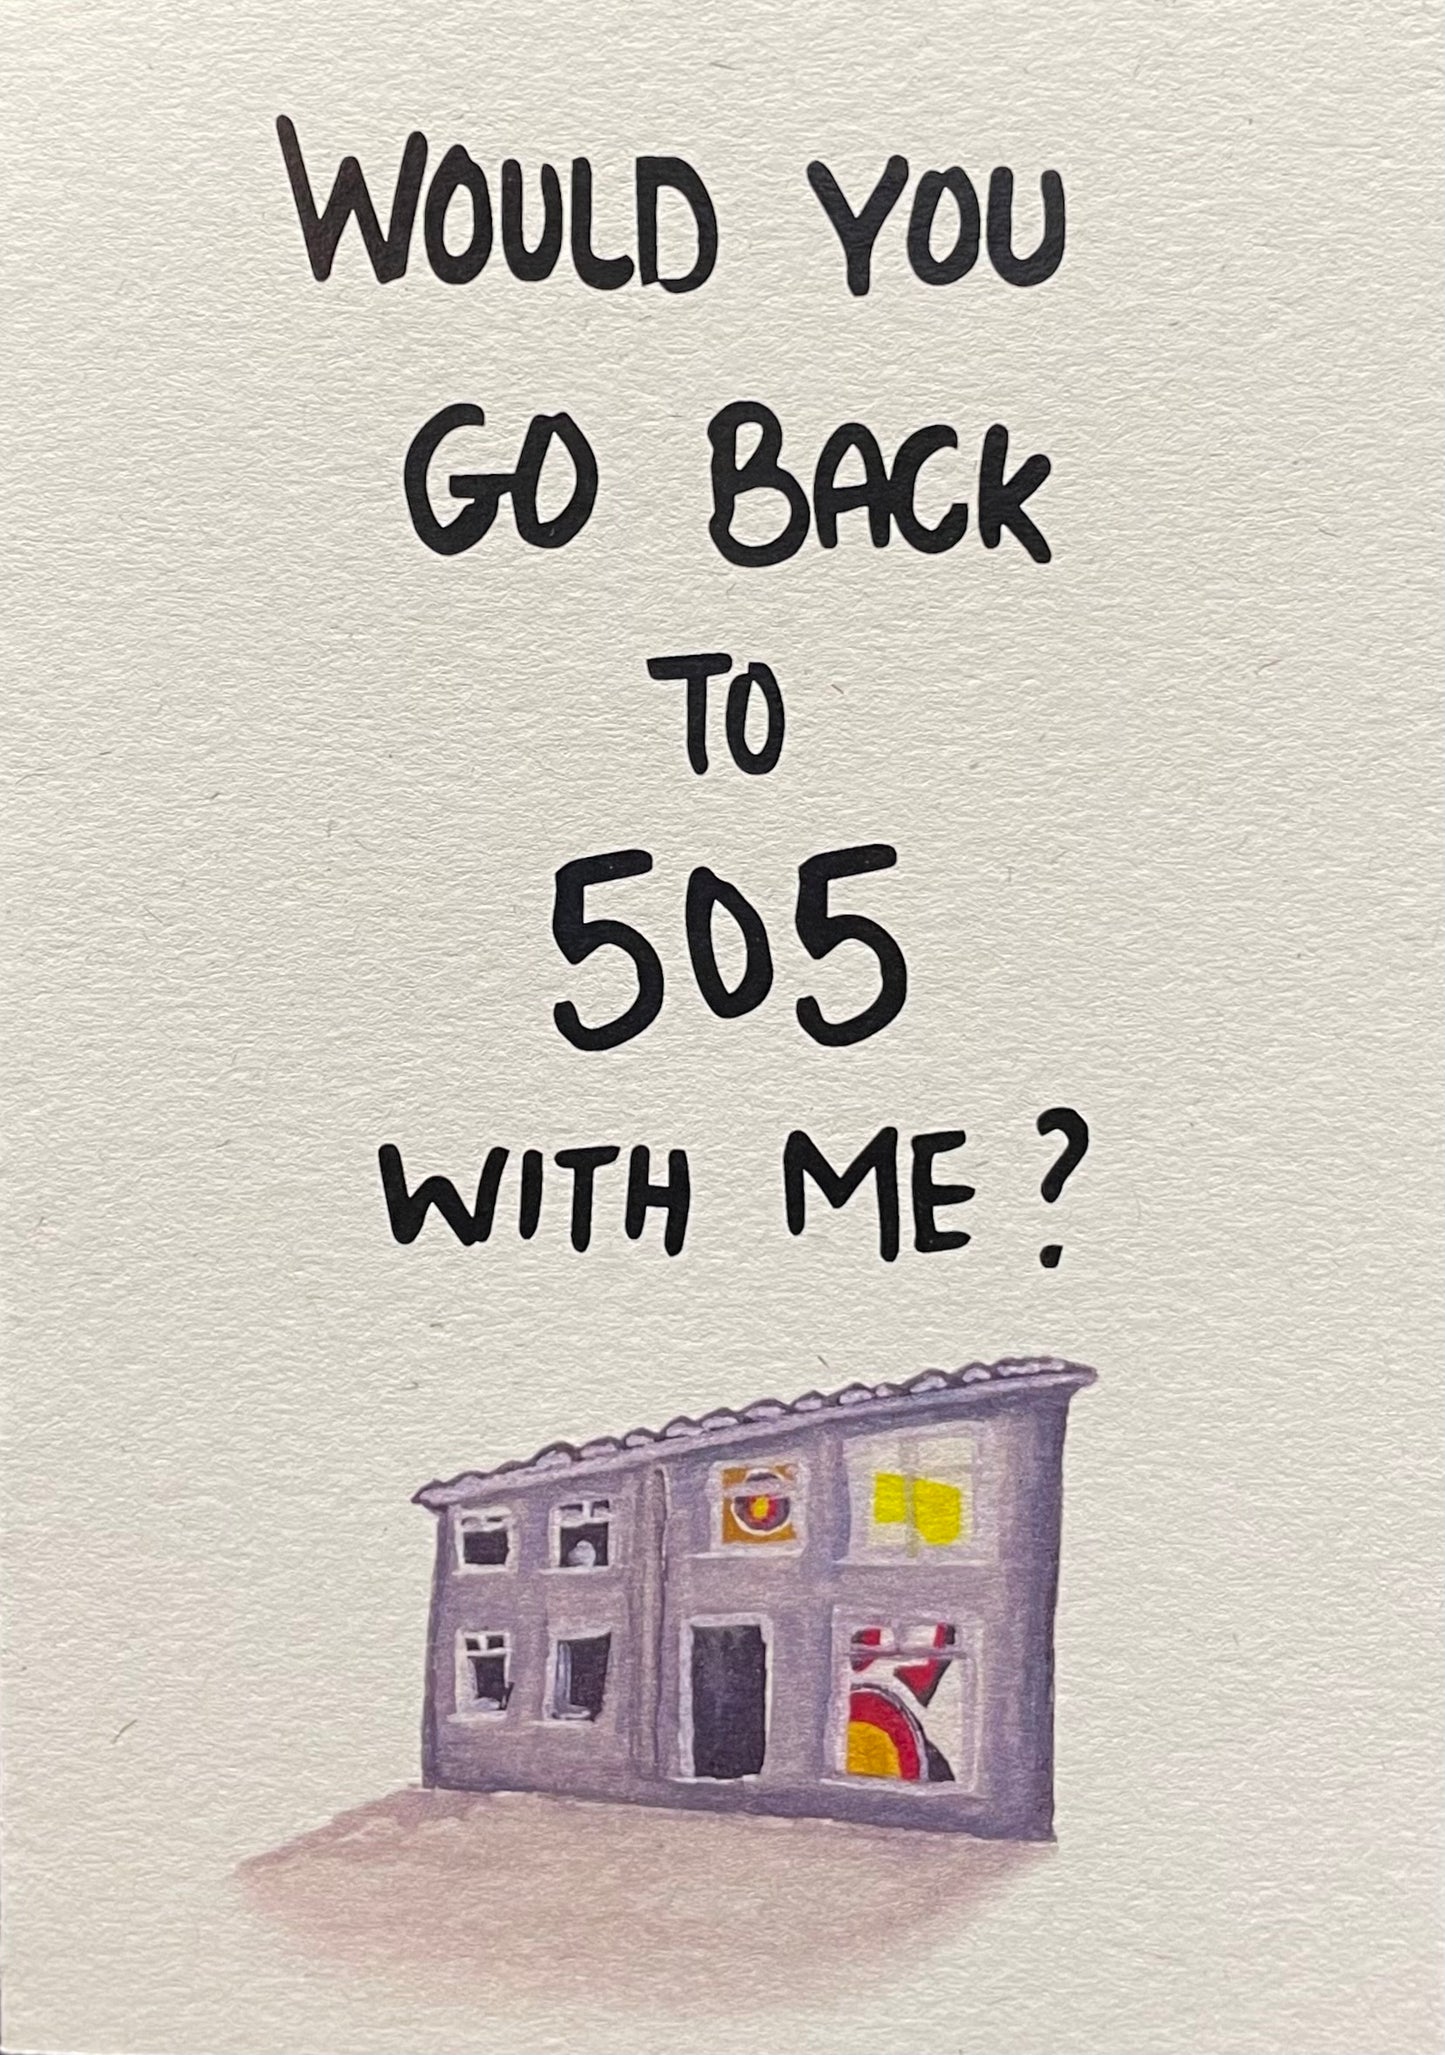 Would you go Back to 505 with me??